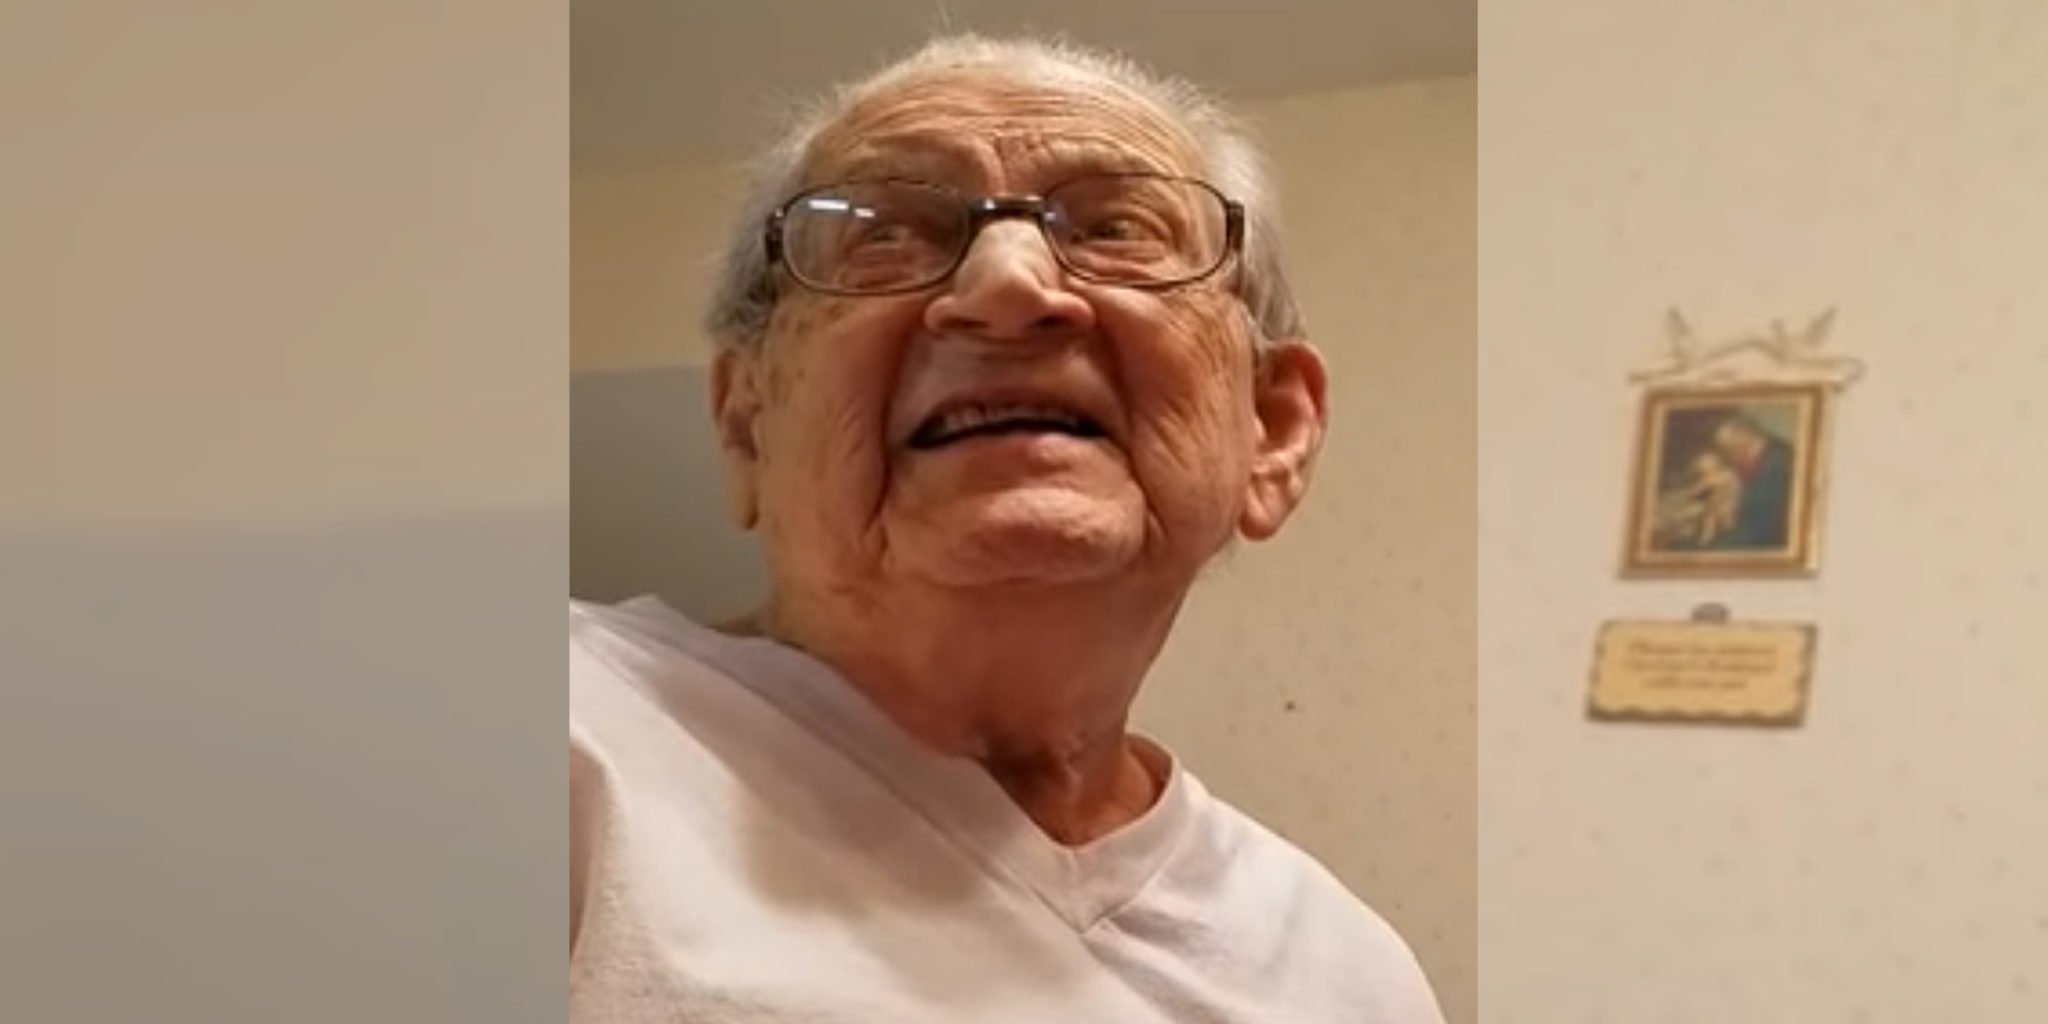 Video: 98-year-old Man Shocked to Learn How Old He Really Is